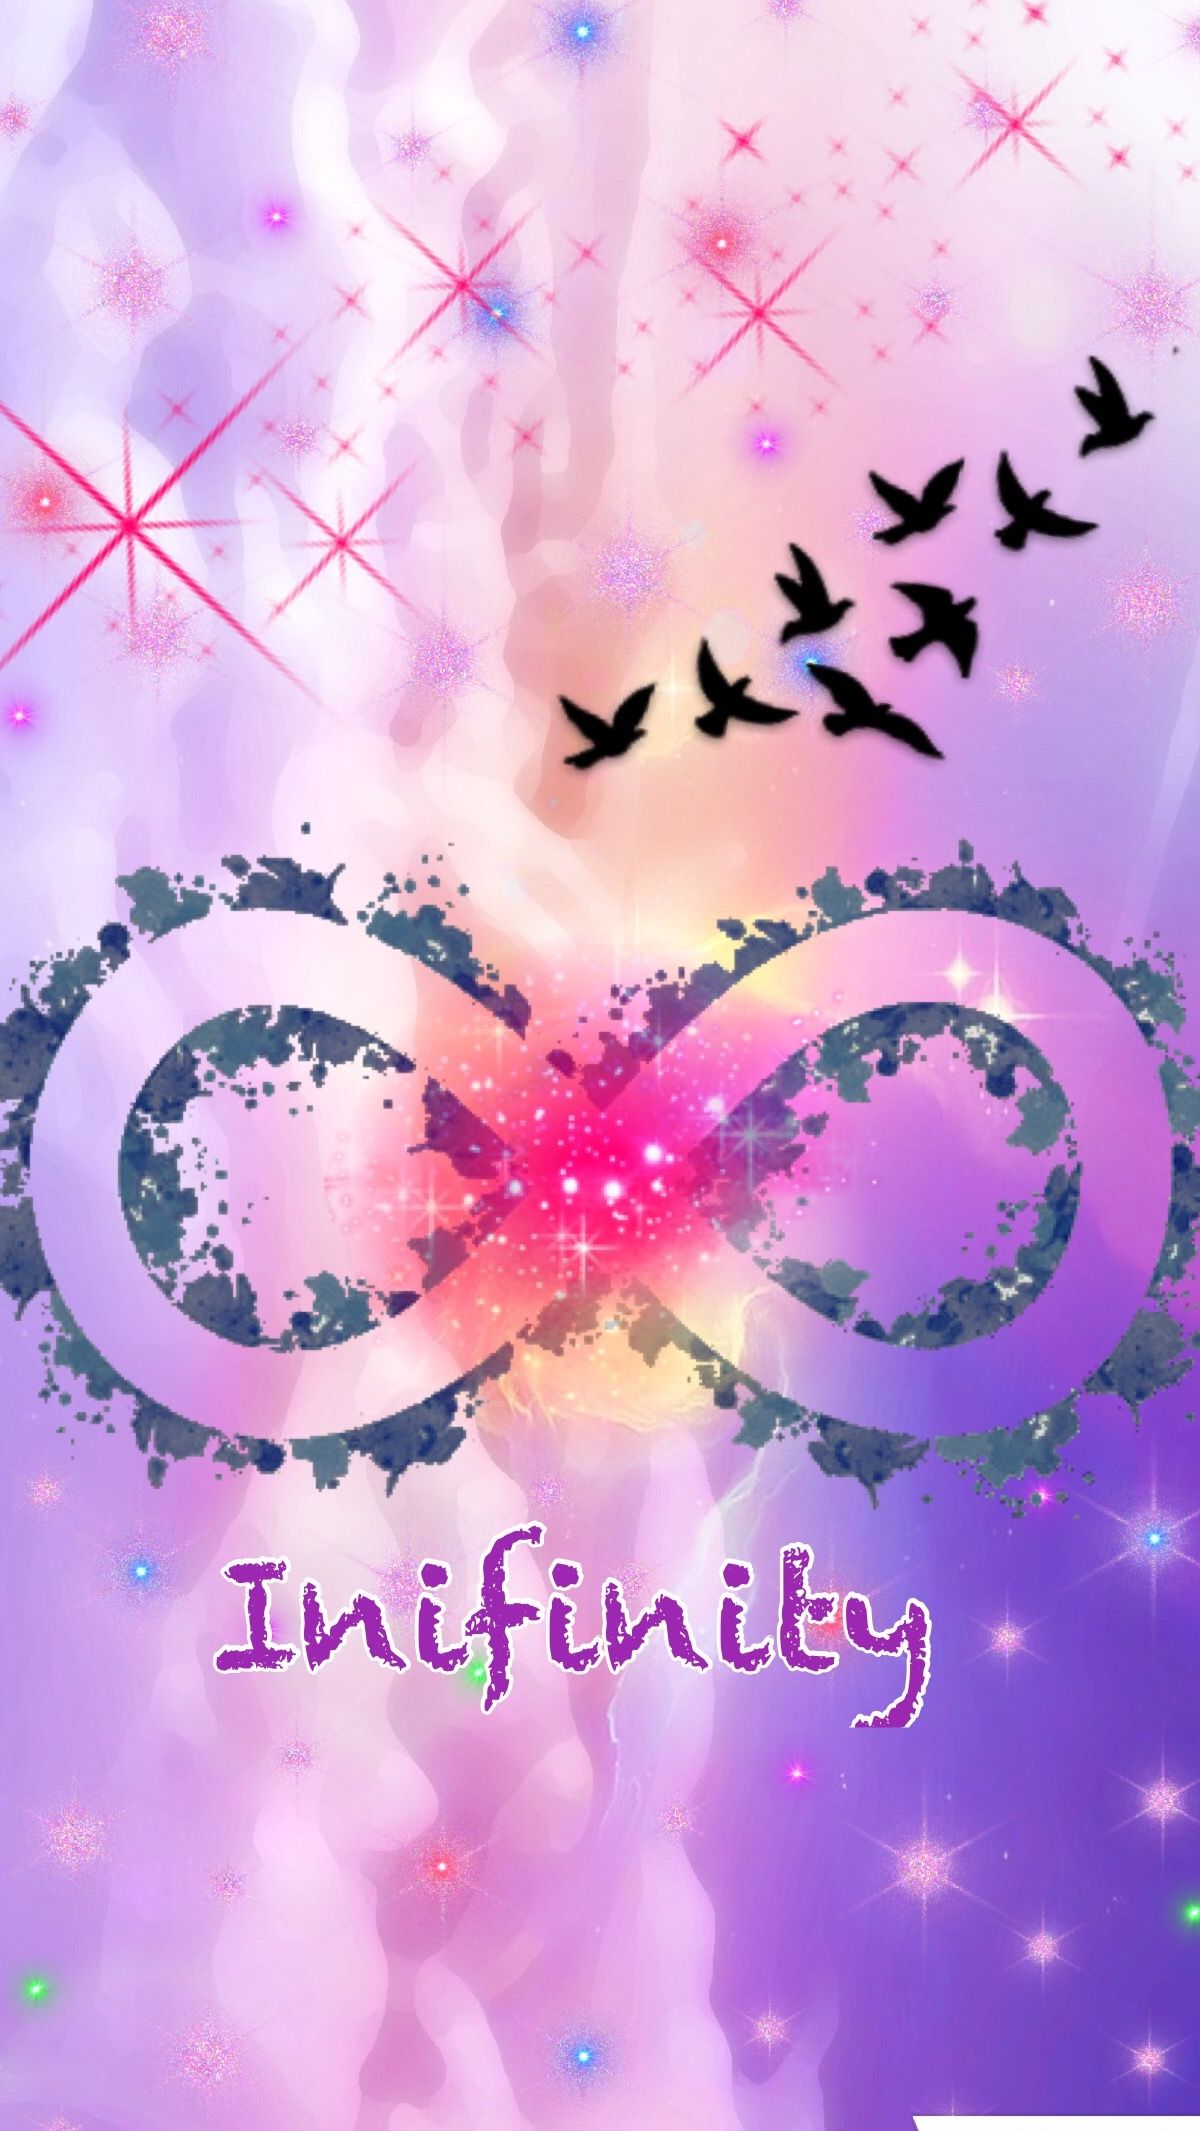 Cute Girly Pictures - Cute Infinity Wallpaper Hd - 1200x2131 Wallpaper -  